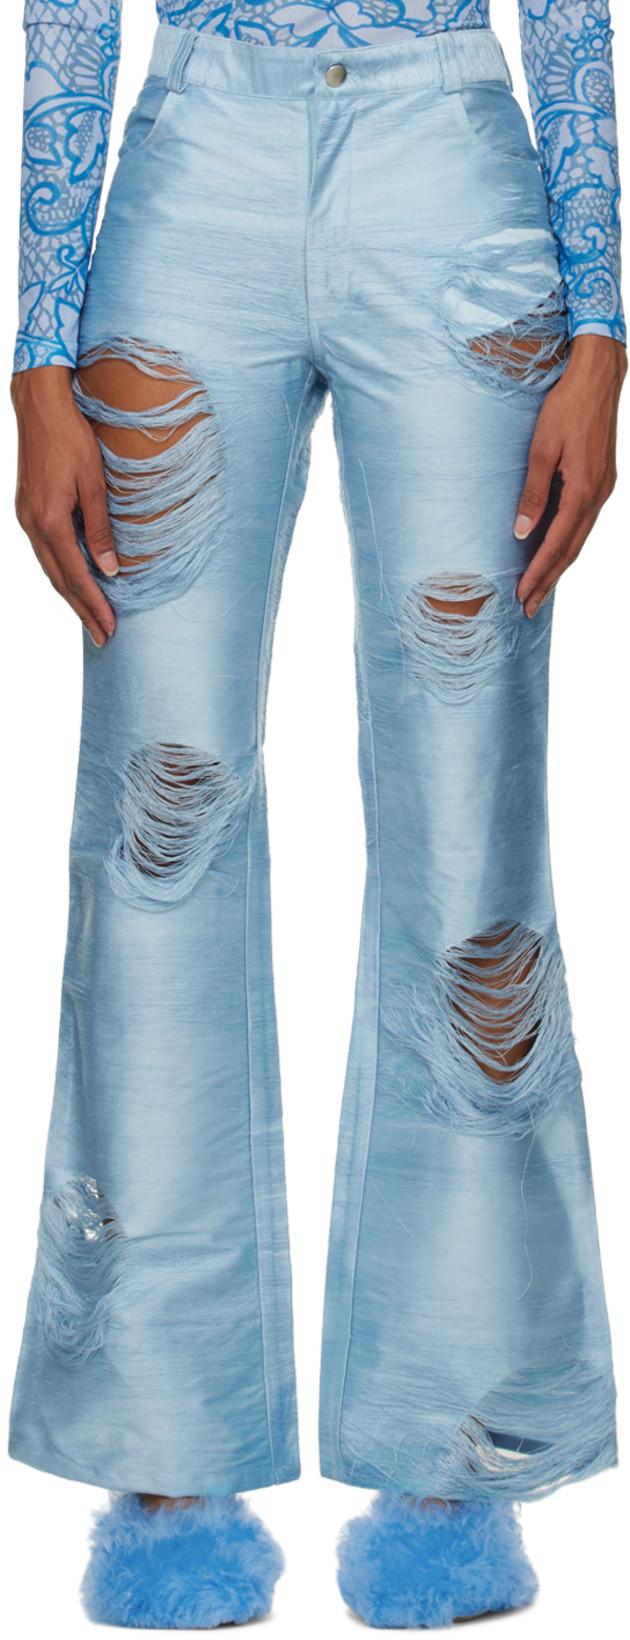 Blue Distressed Trousers by CONSTANCA ENTRUDO